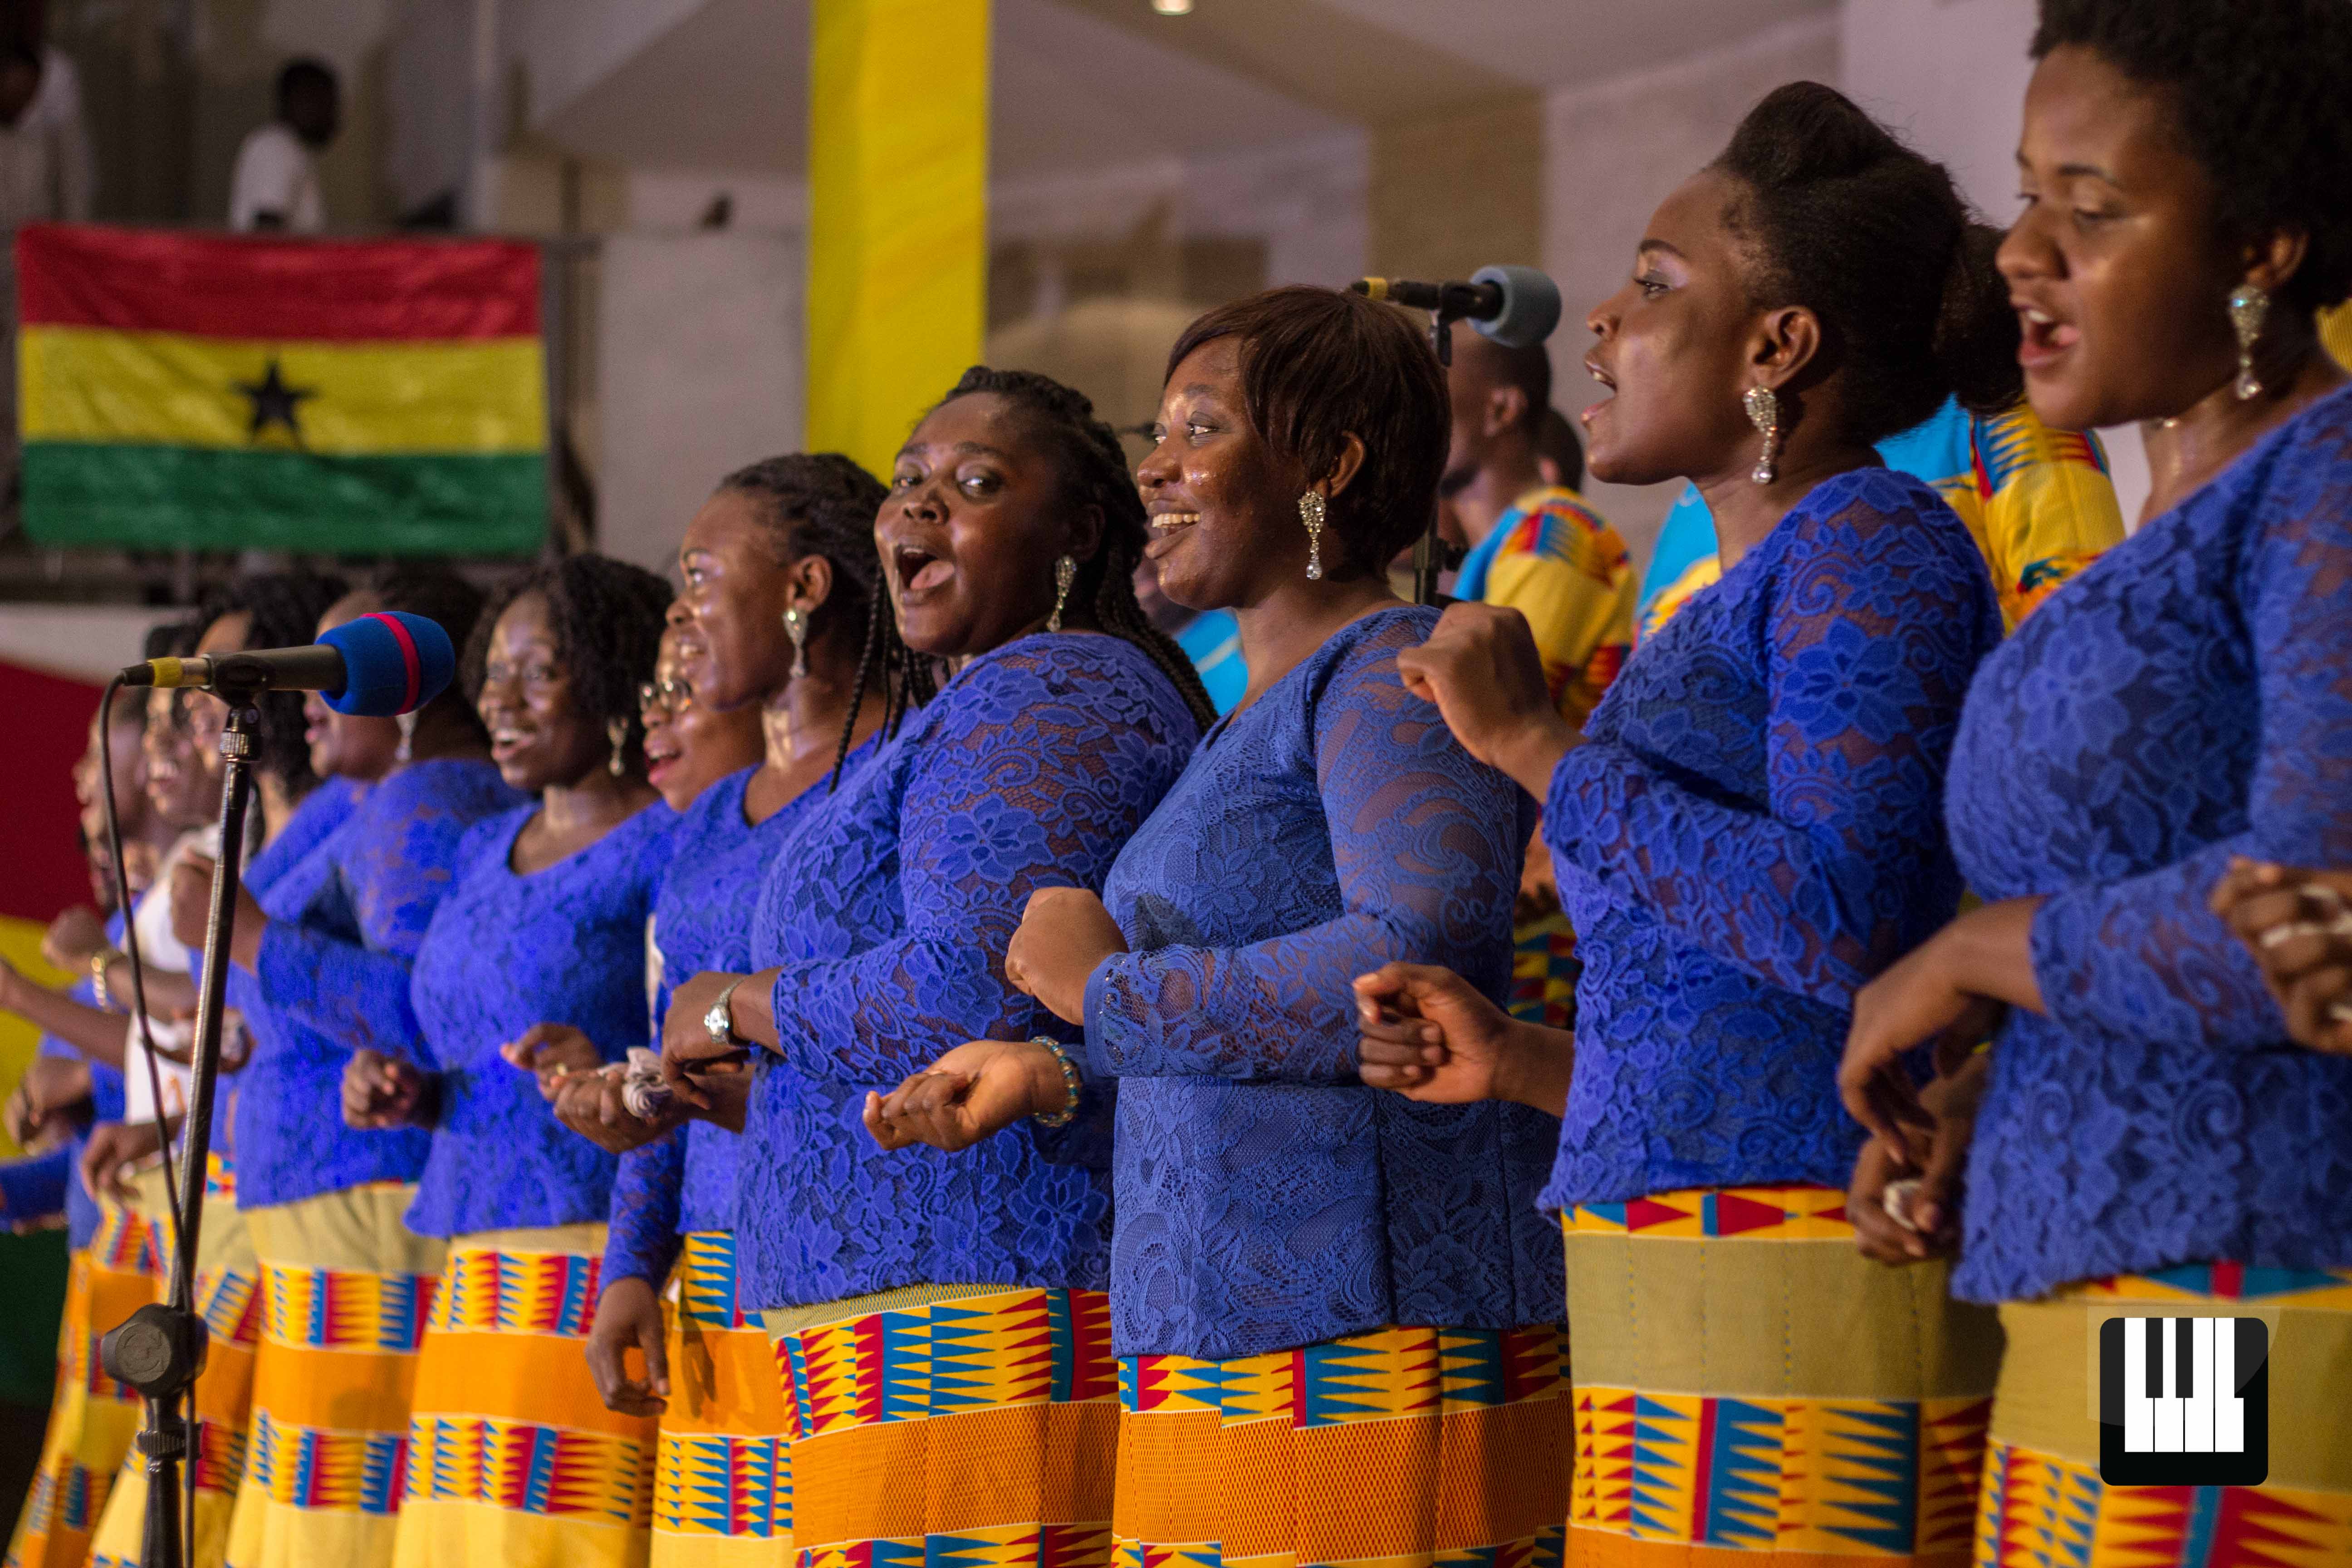 Joseph & His Brethren Premiers in Africa We look forward to one of the biggest musical events this year, as Harmonious Chorale premiers Handel's Joseph and his Brethren in Accra.